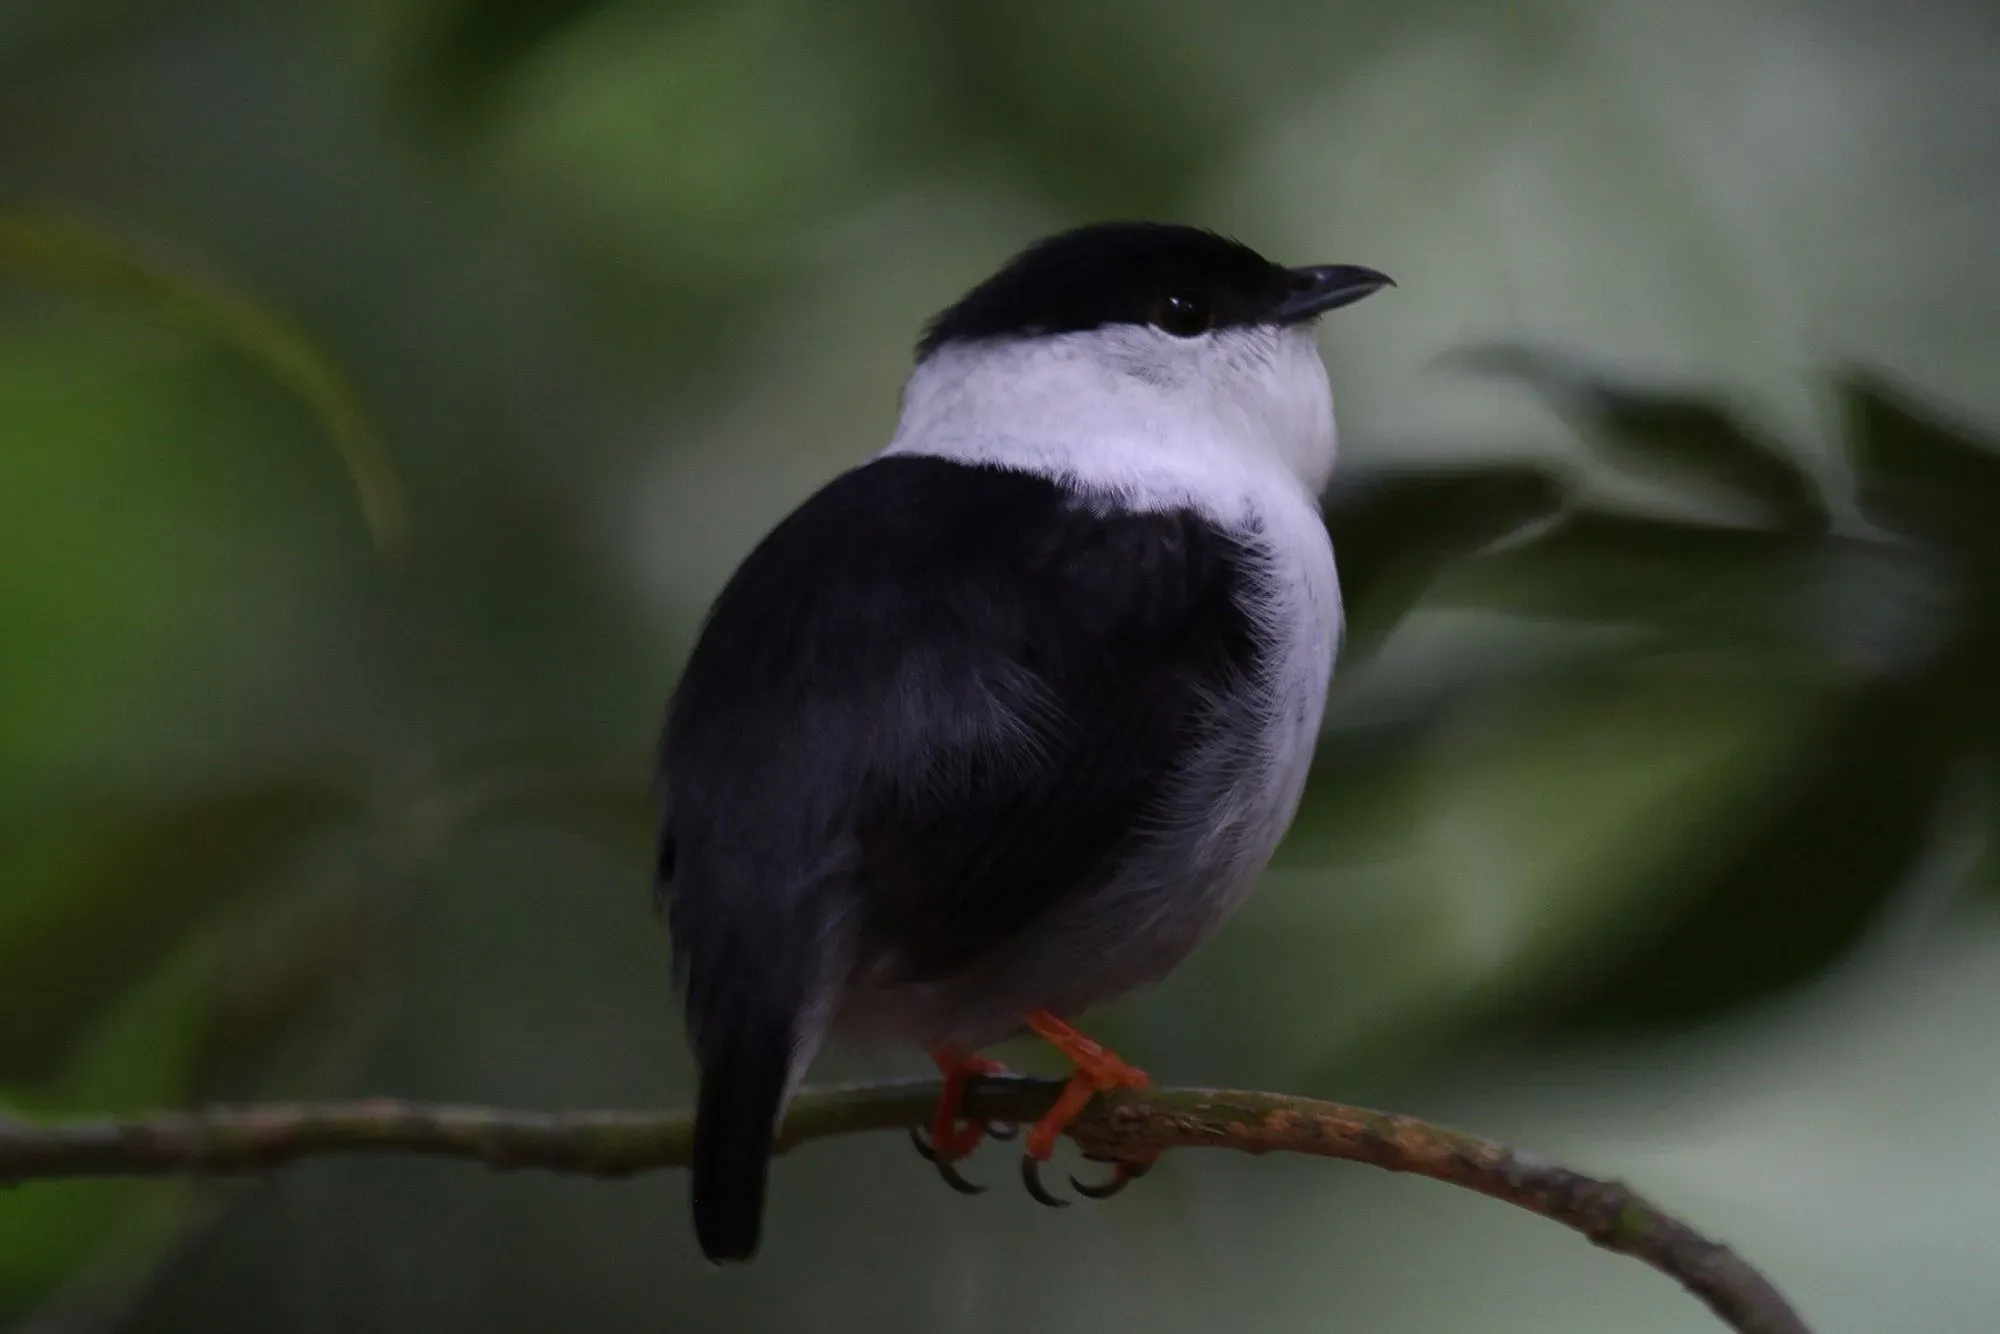 White-bearded manakins are extremely cute to look at.